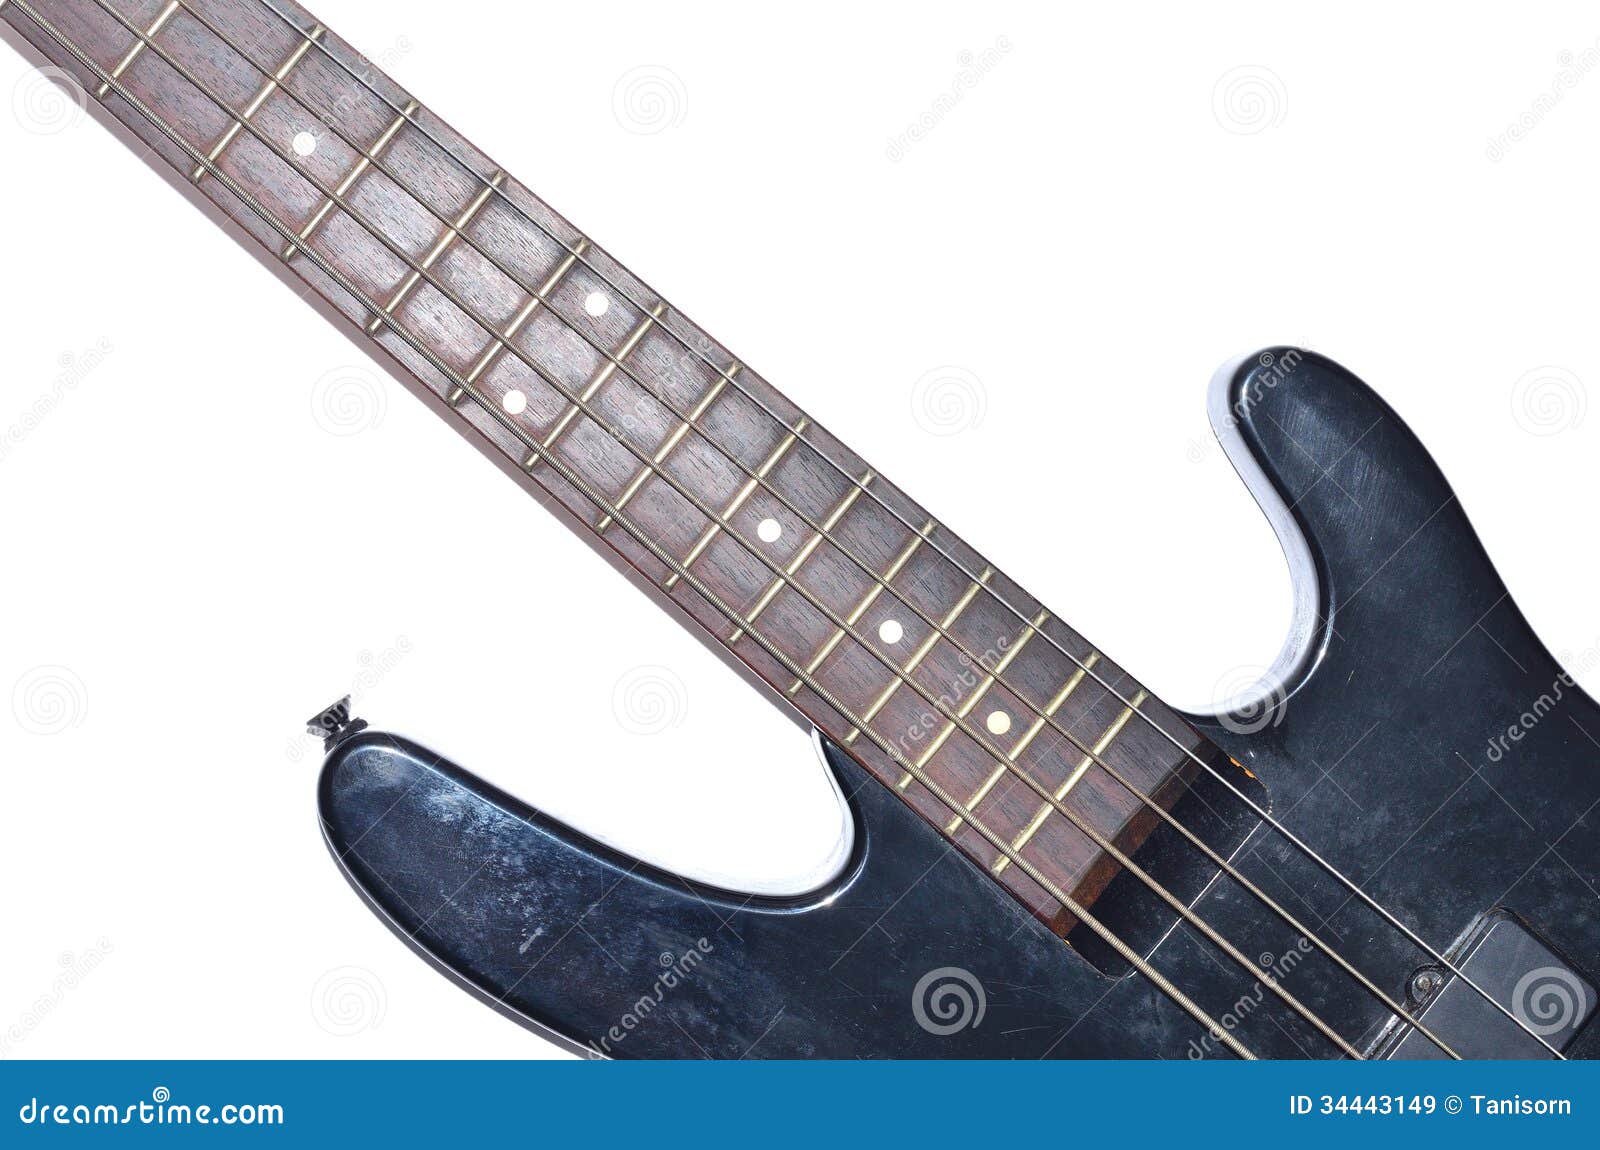 Electric Bass guitar isolated on white background, Music concept.